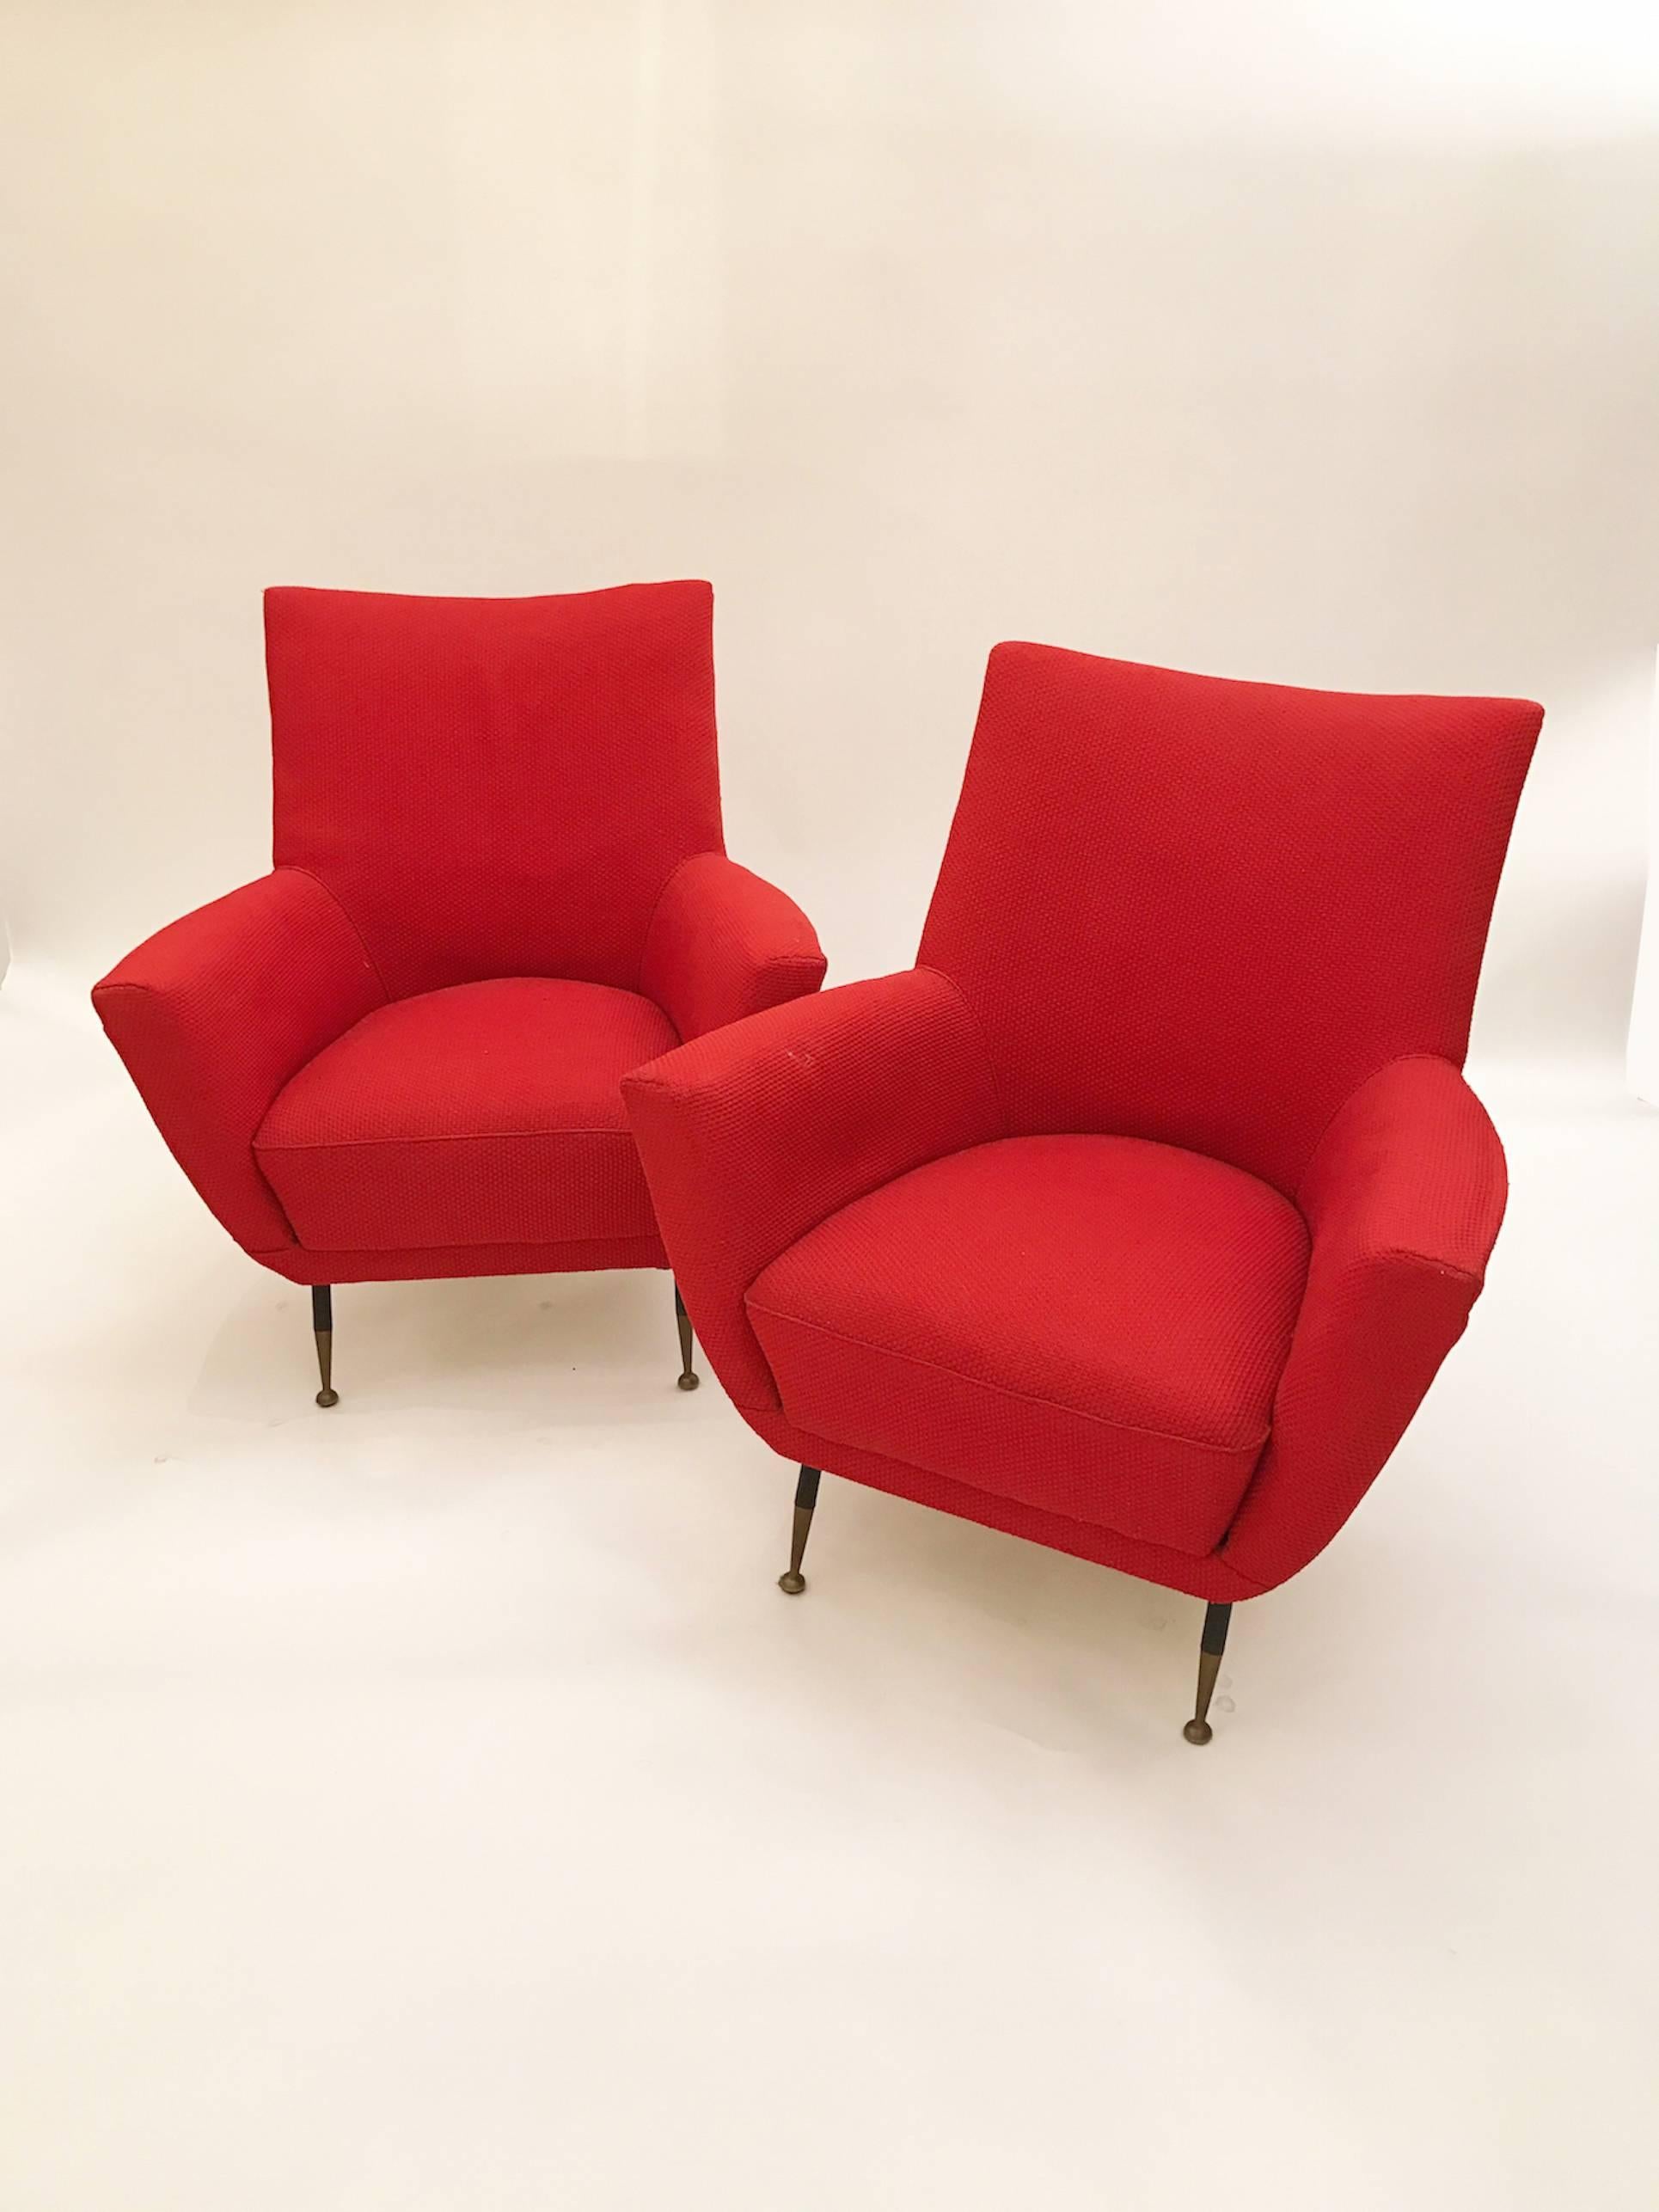 Pair of Mid-Century club chairs each featuring tight seats and backs with integrated curving armrests and tapering blackened steel legs with brass feet. The clubs are upholstered in their original red textured fabric. There is a matching settee that